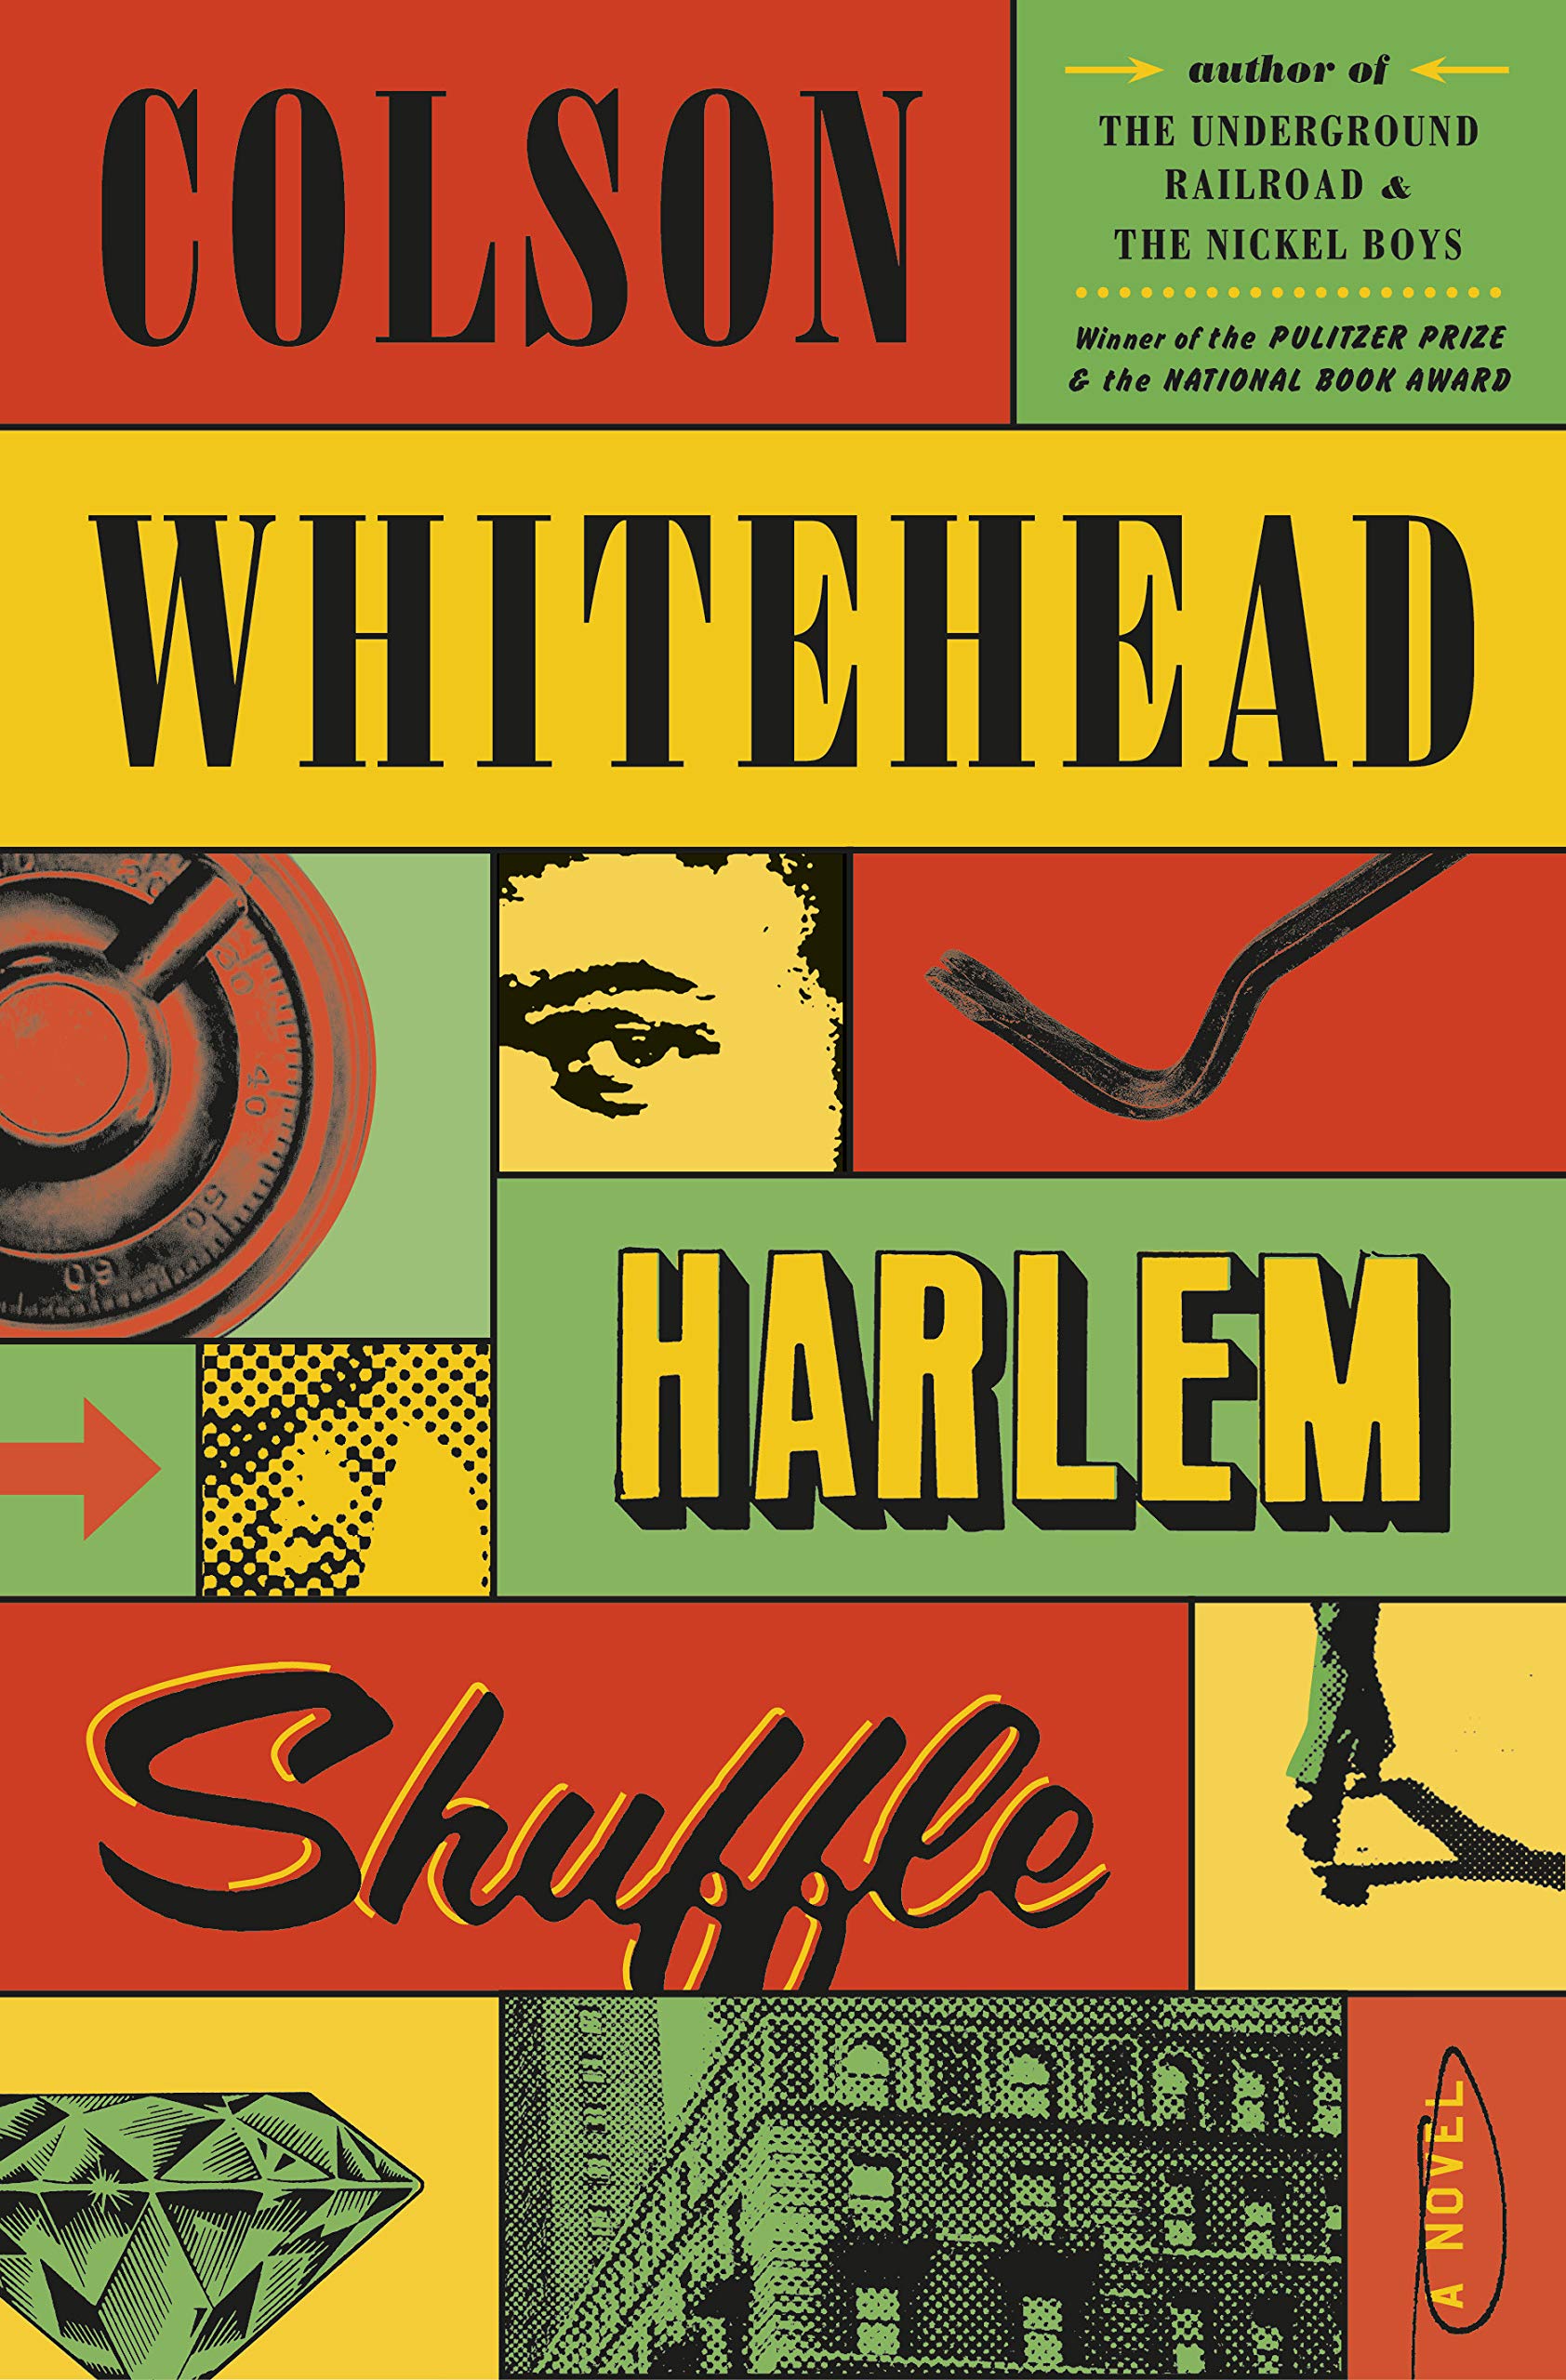 Colson Whitehead's 'Harlem Shuffle' Tackles The Crime Caper To Critical Acclaim | Book Pulse